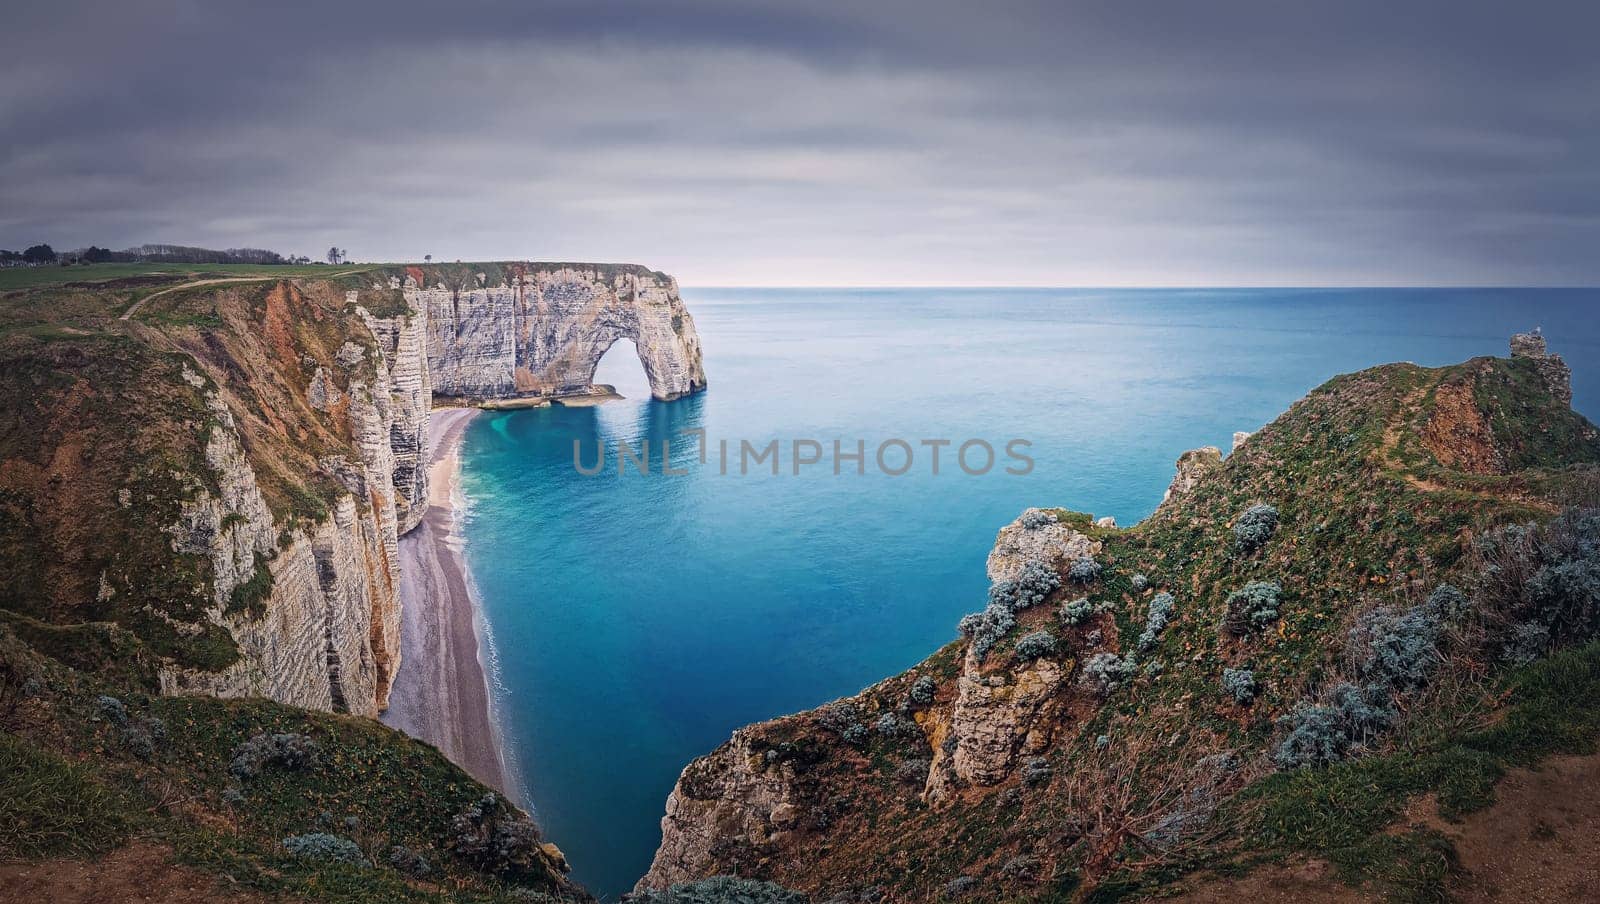 Idyllic panorama of Porte d'Aval natural arch at Etretat famous cliffs washed by Atlantic ocean, Normandy, France. Sightseeing coastline scenery, beautiful natural bay with sand beach by psychoshadow